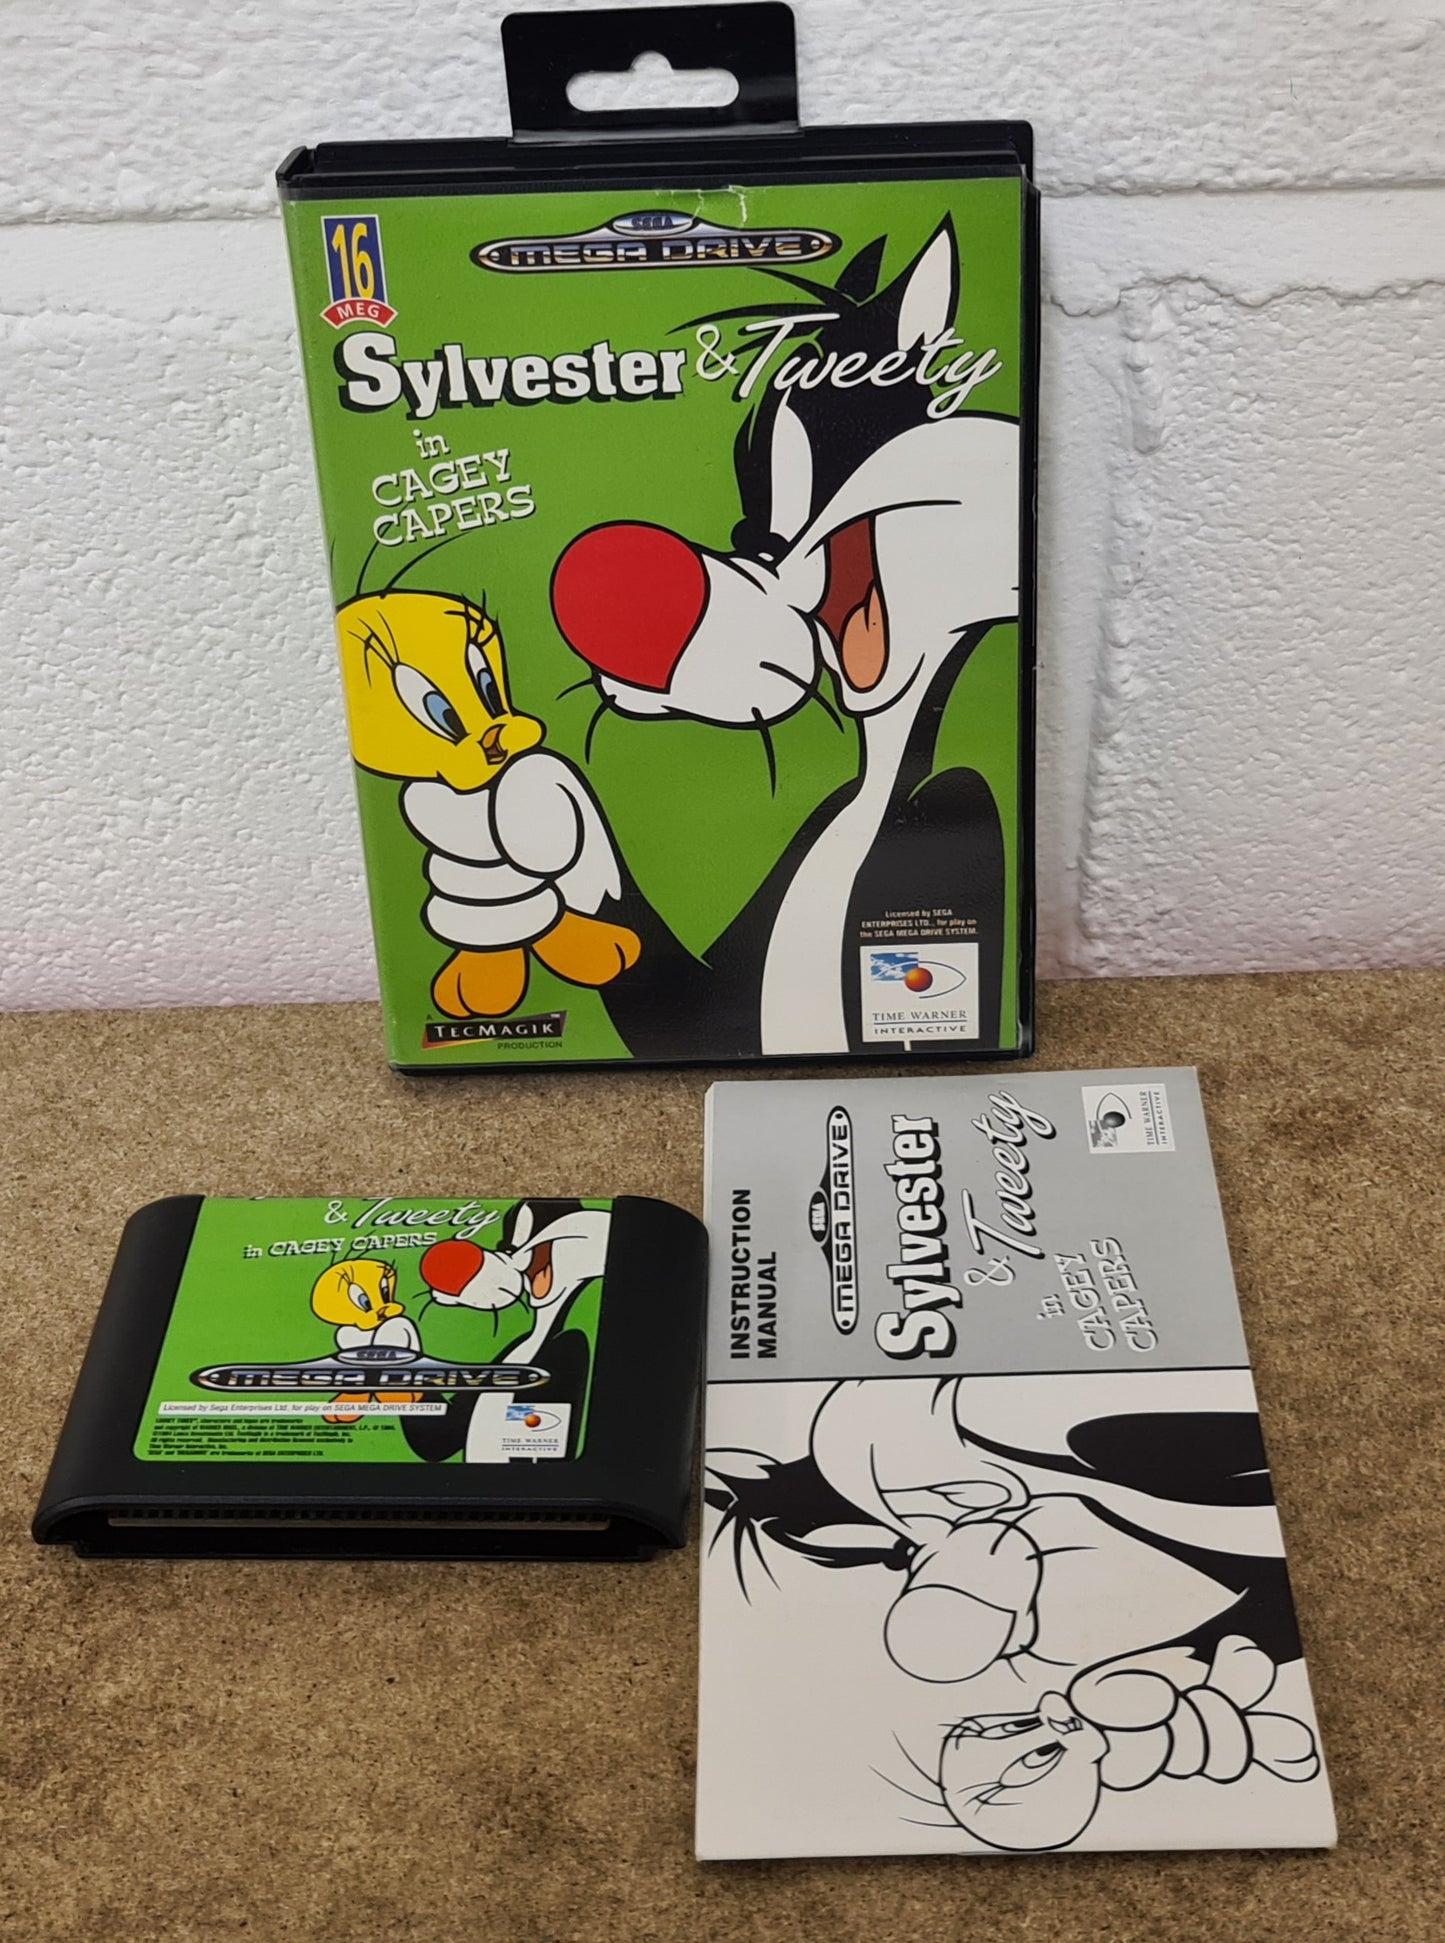 Sylvester & Tweety in Cagey Capers (Sega Mega Drive) game